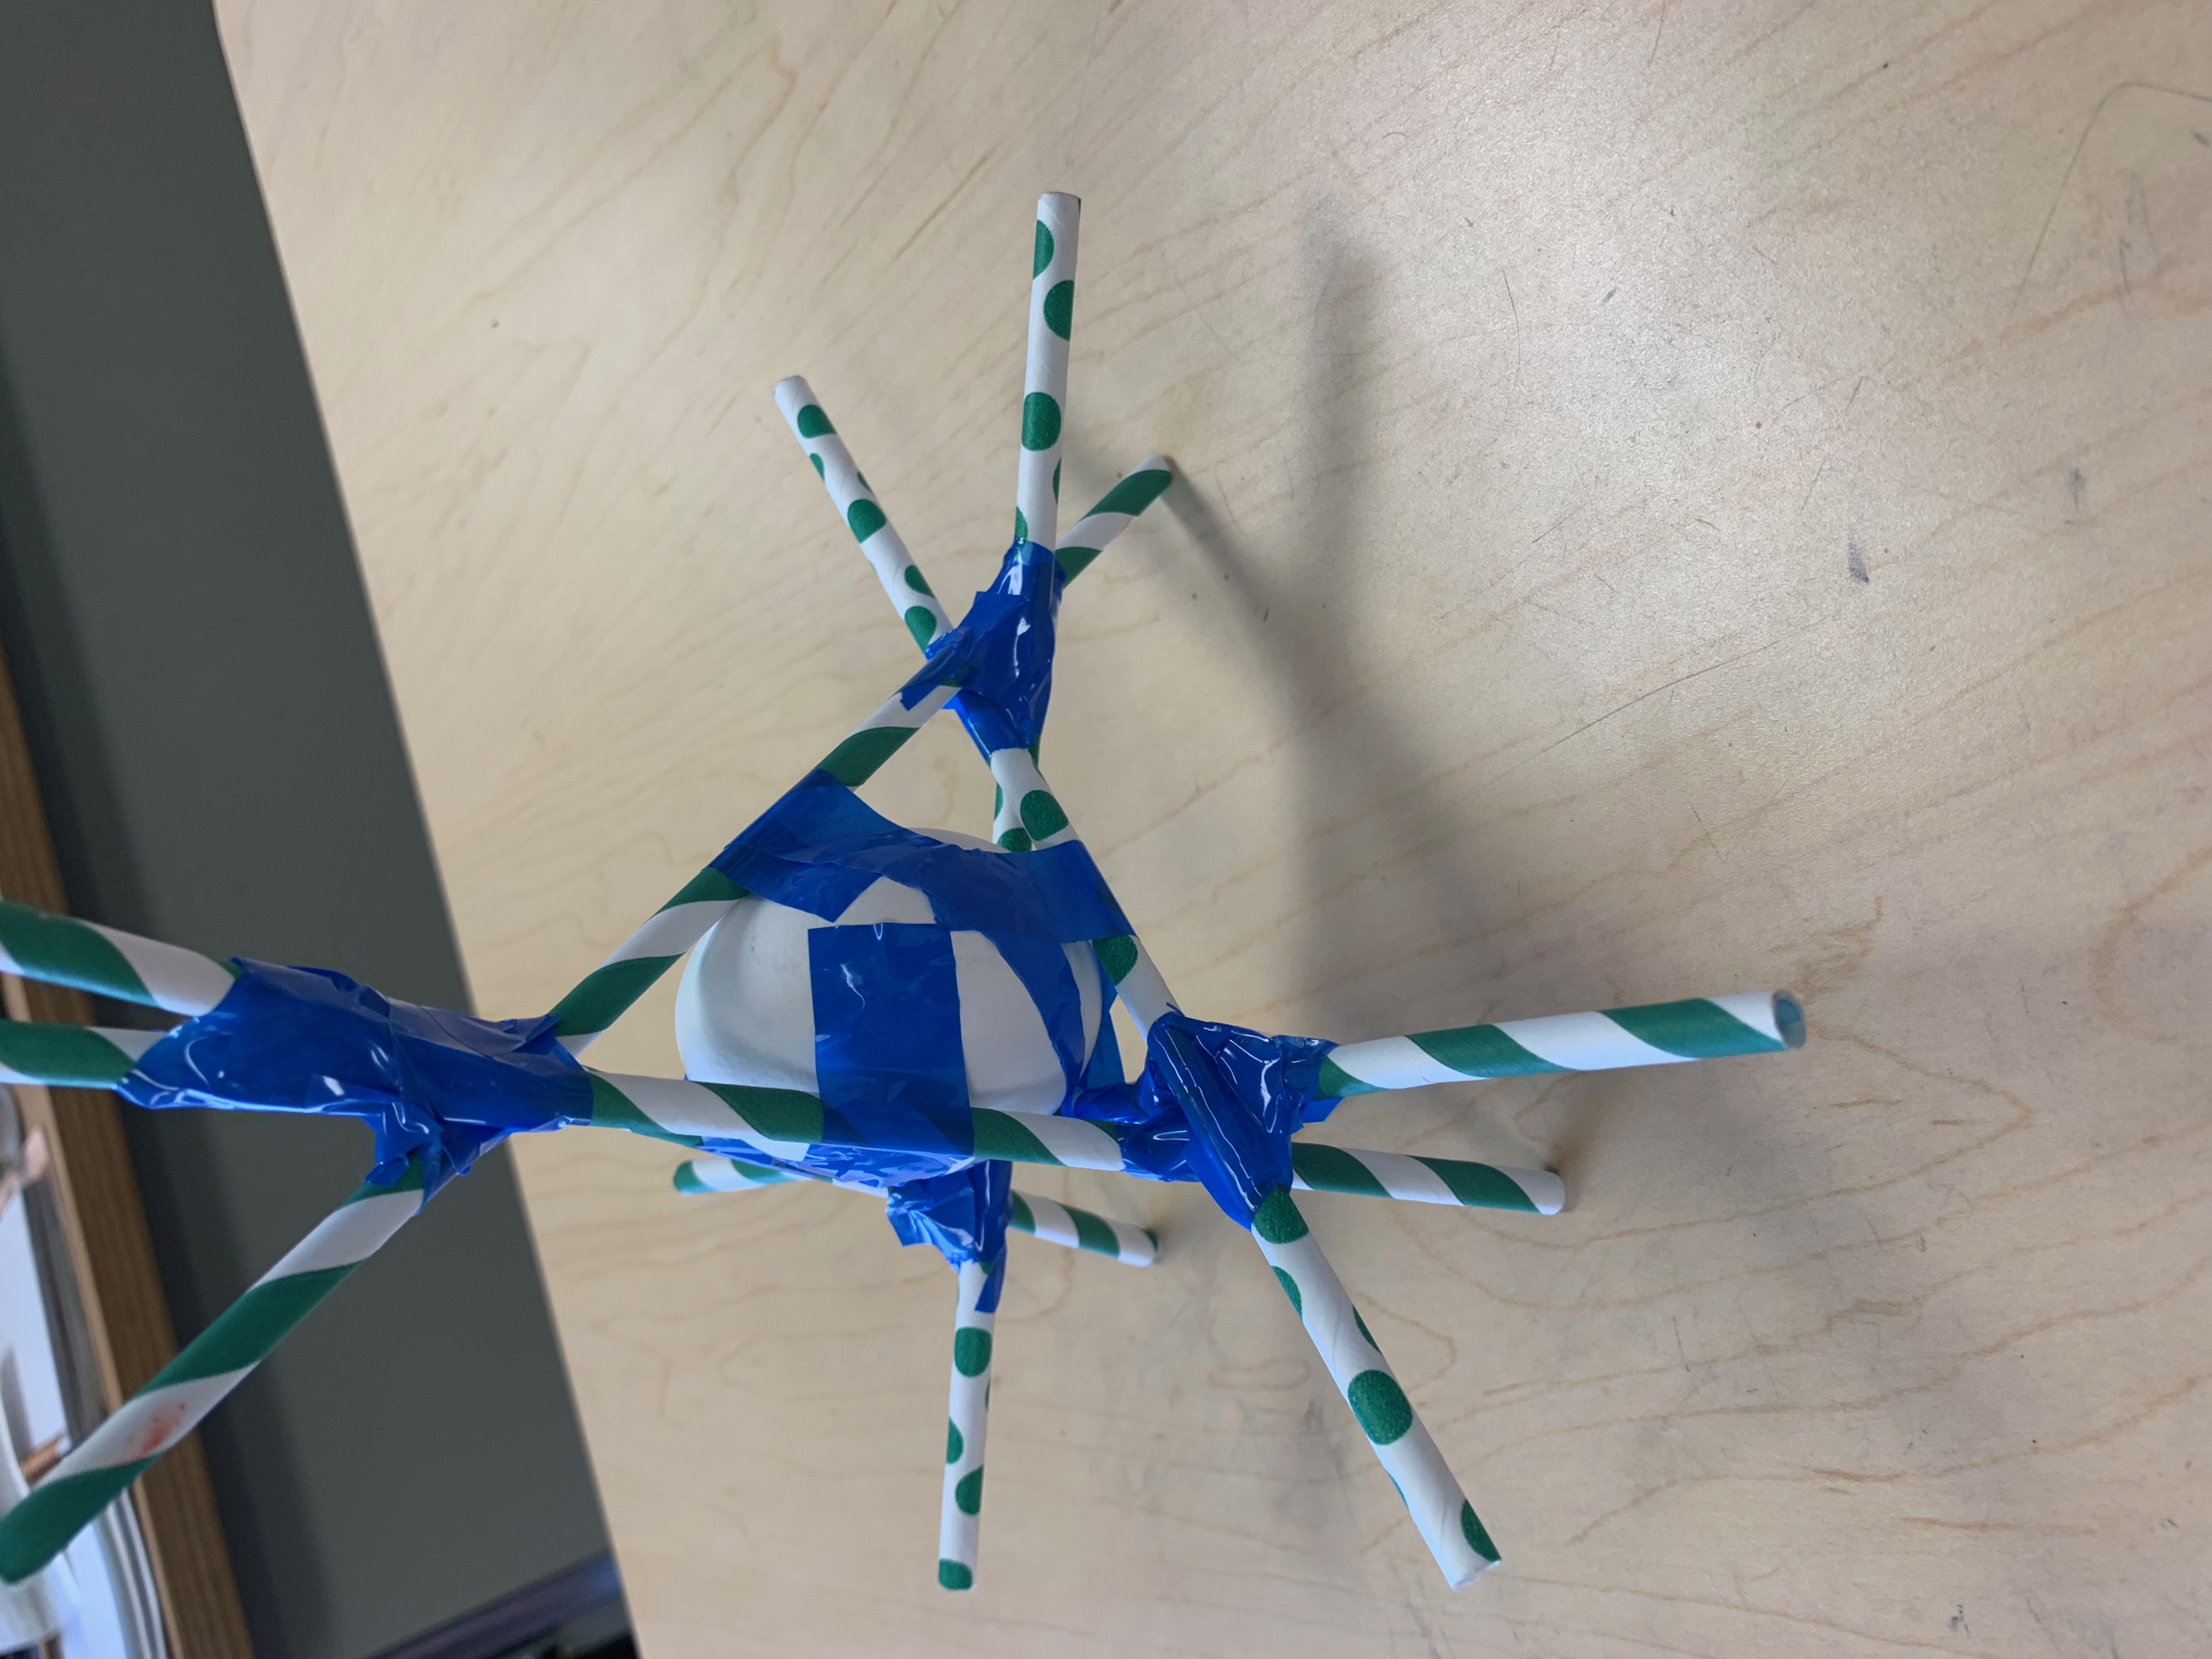 egg drop project using only paper